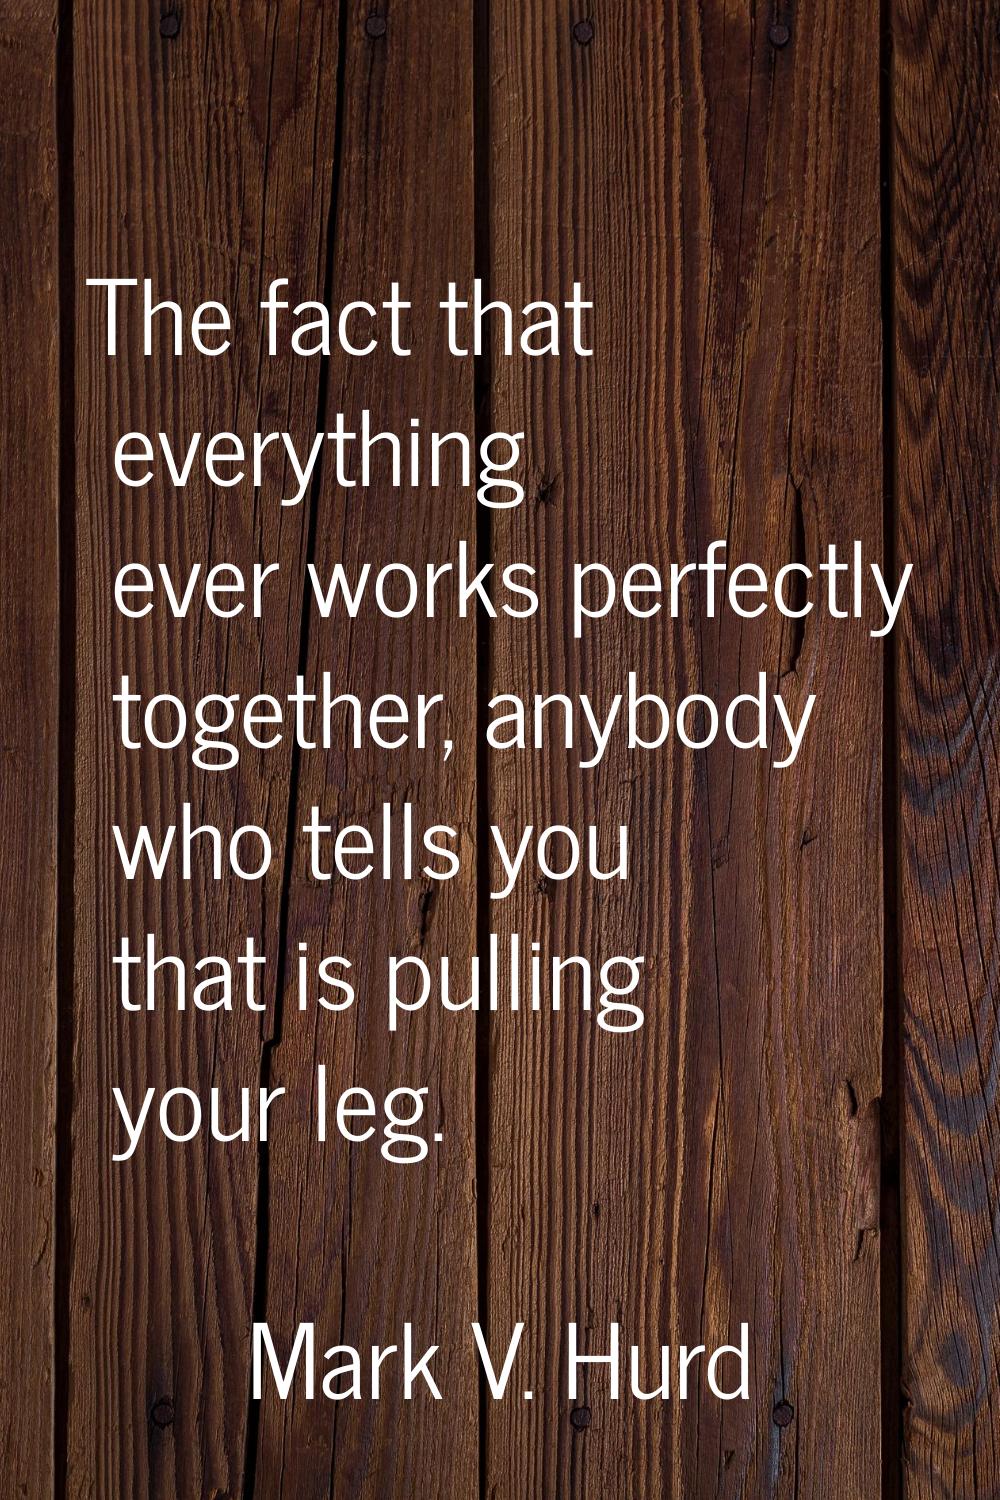 The fact that everything ever works perfectly together, anybody who tells you that is pulling your 